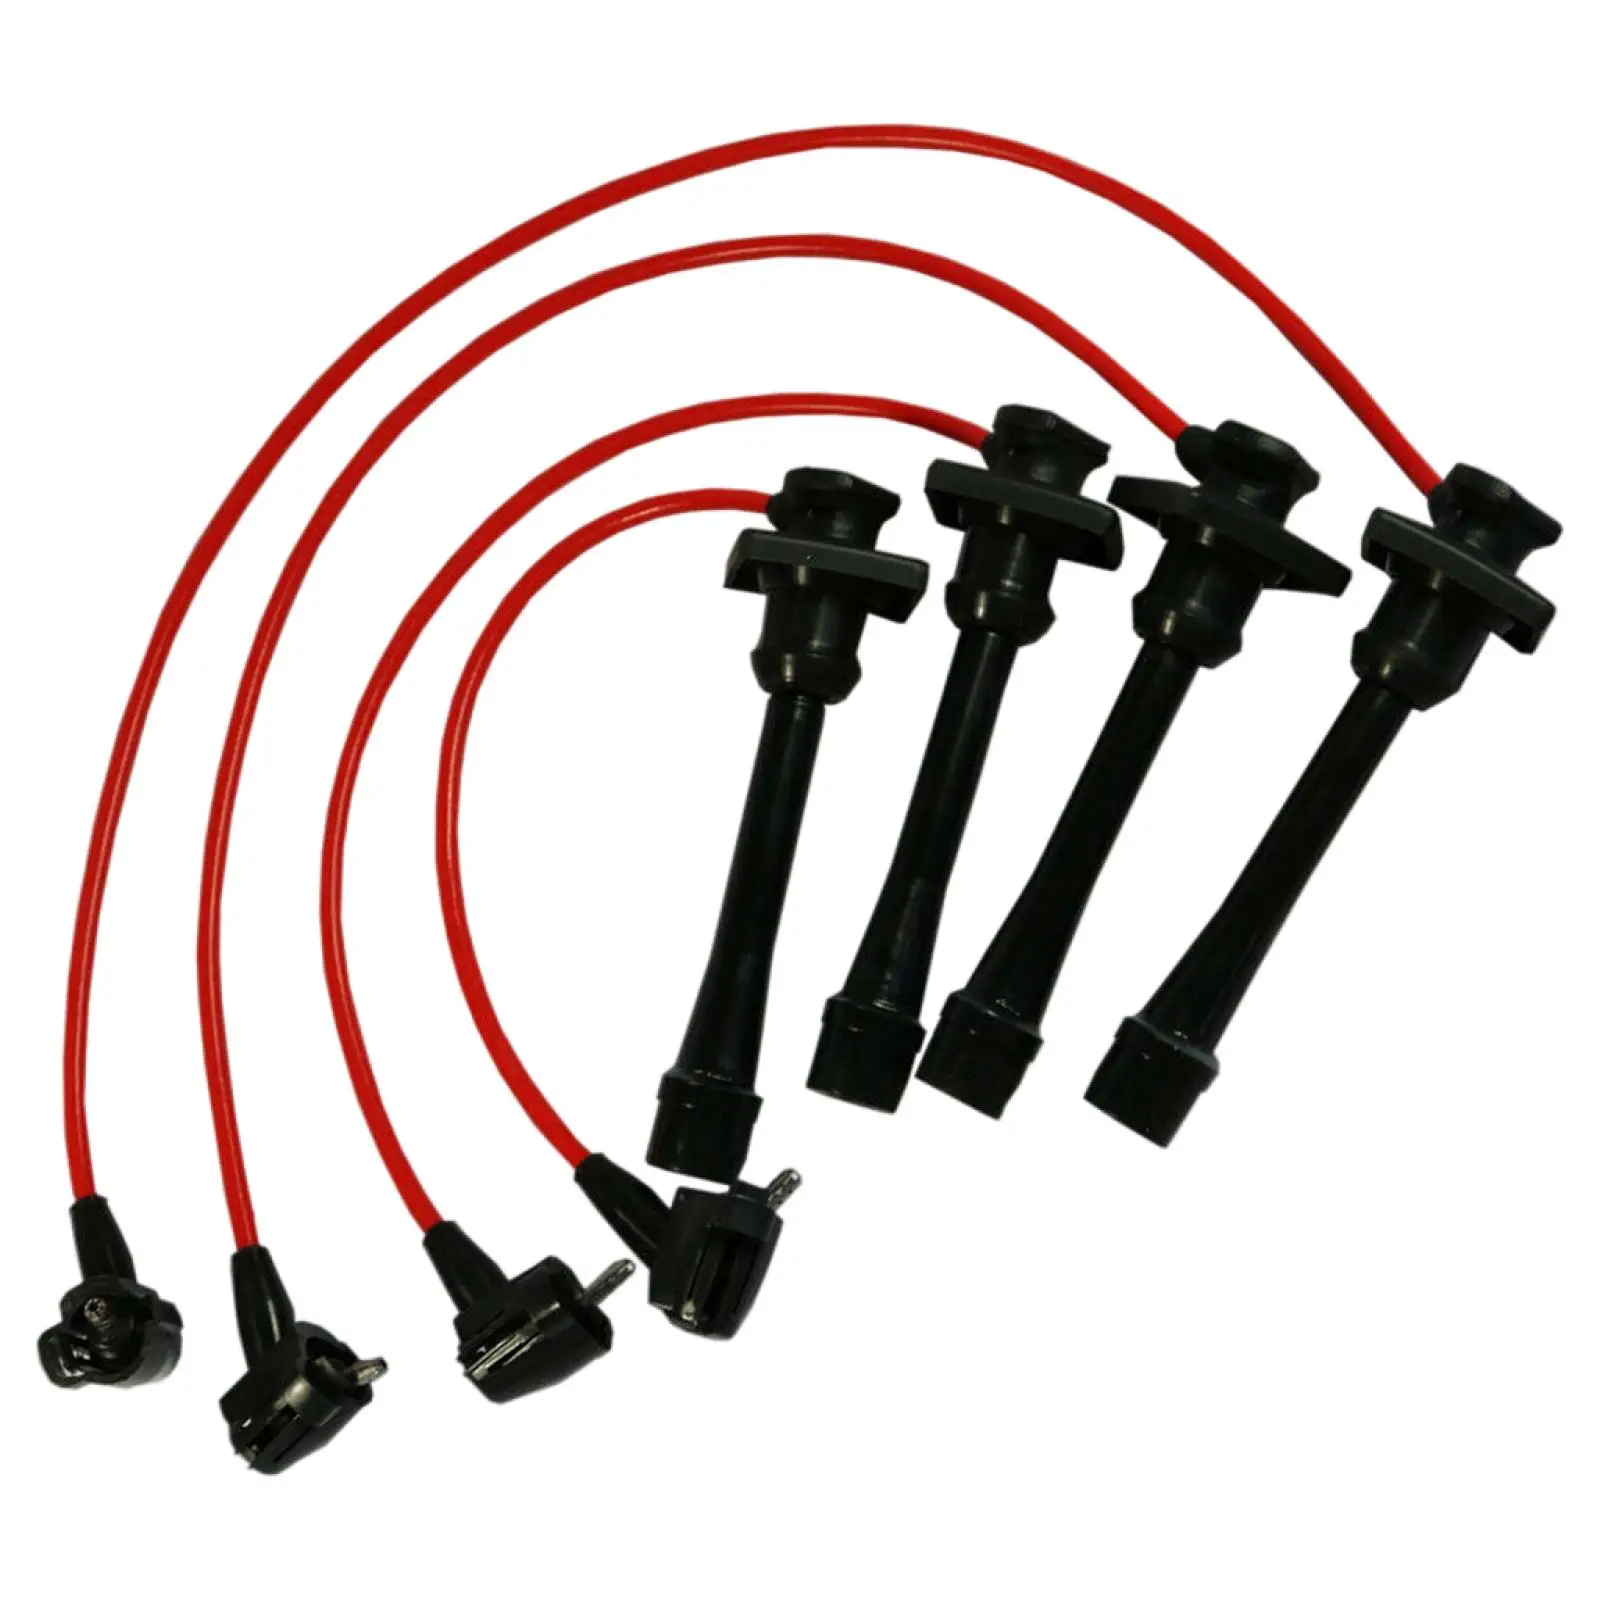 4Pcs Spark Plug Wires Set 90919-22327 Silicone Ignition Cable for 1993-1997